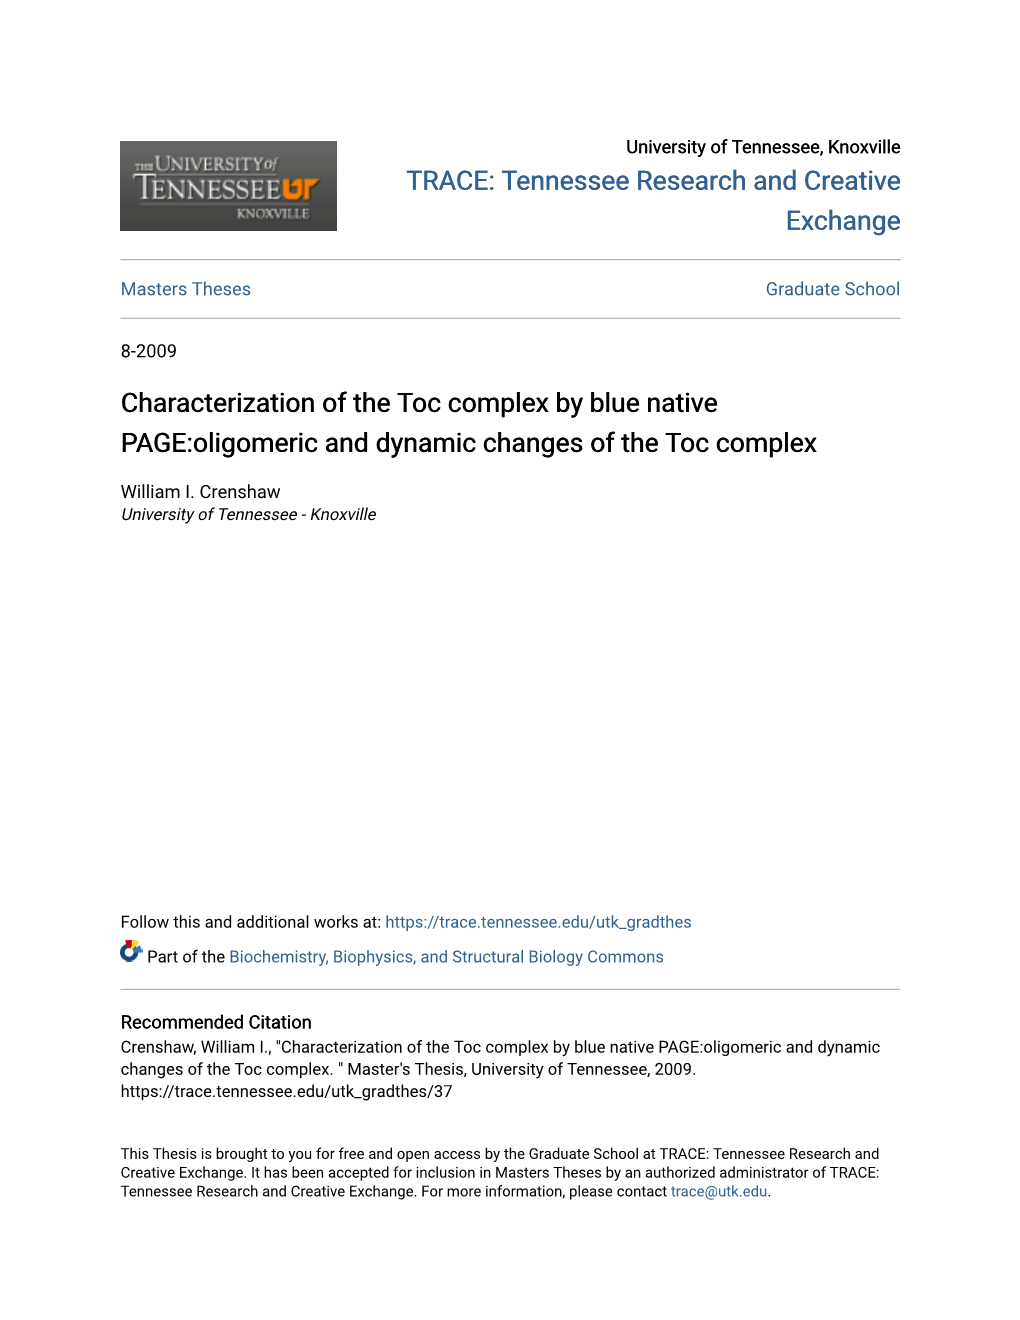 Characterization of the Toc Complex by Blue Native PAGE:Oligomeric and Dynamic Changes of the Toc Complex